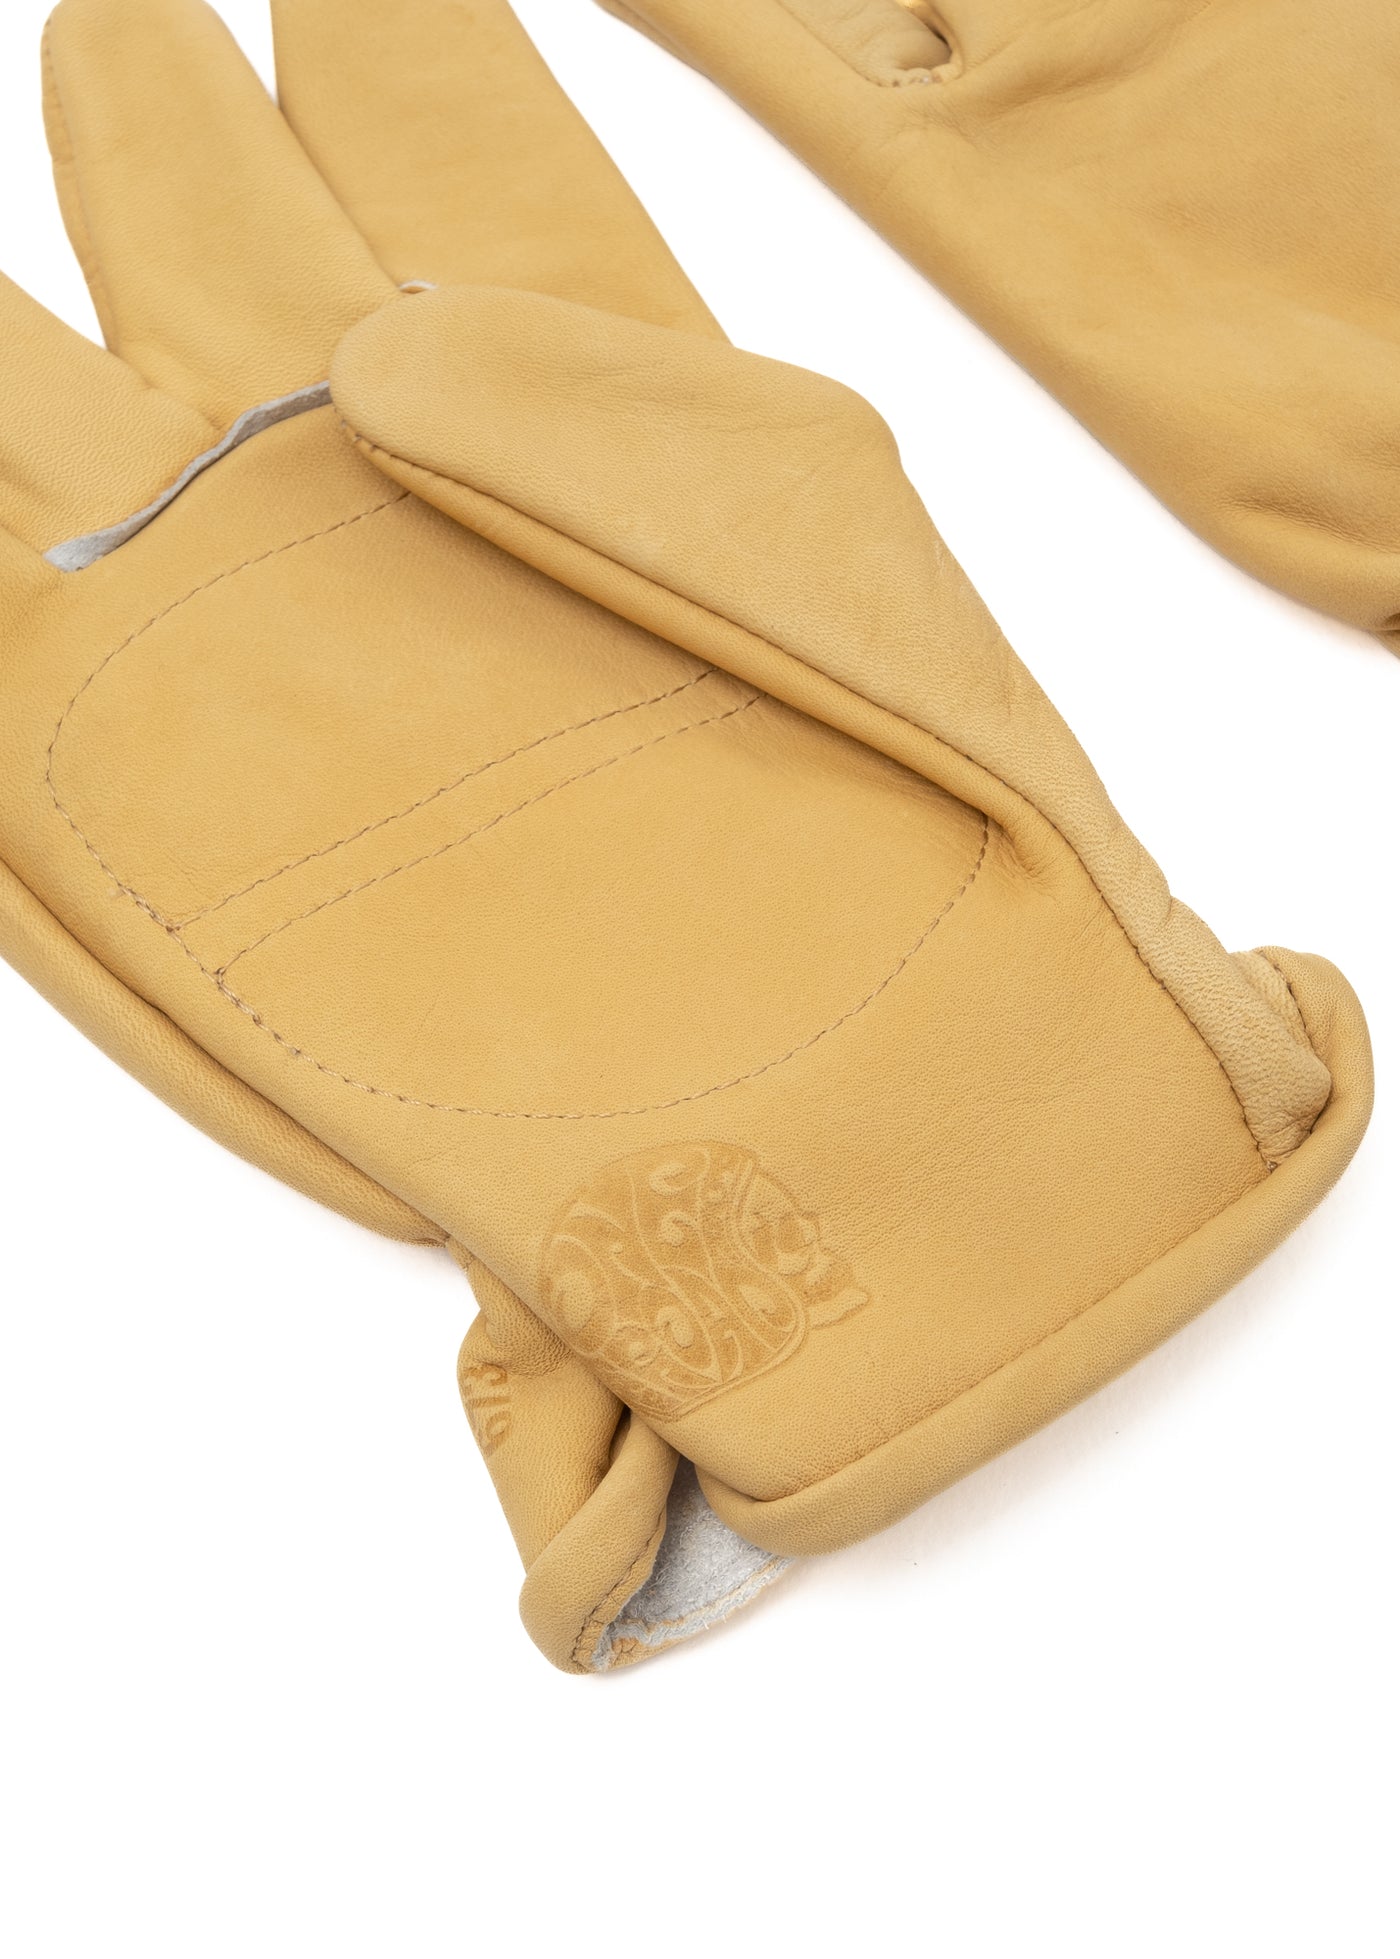 Power Gloves Leather Natural